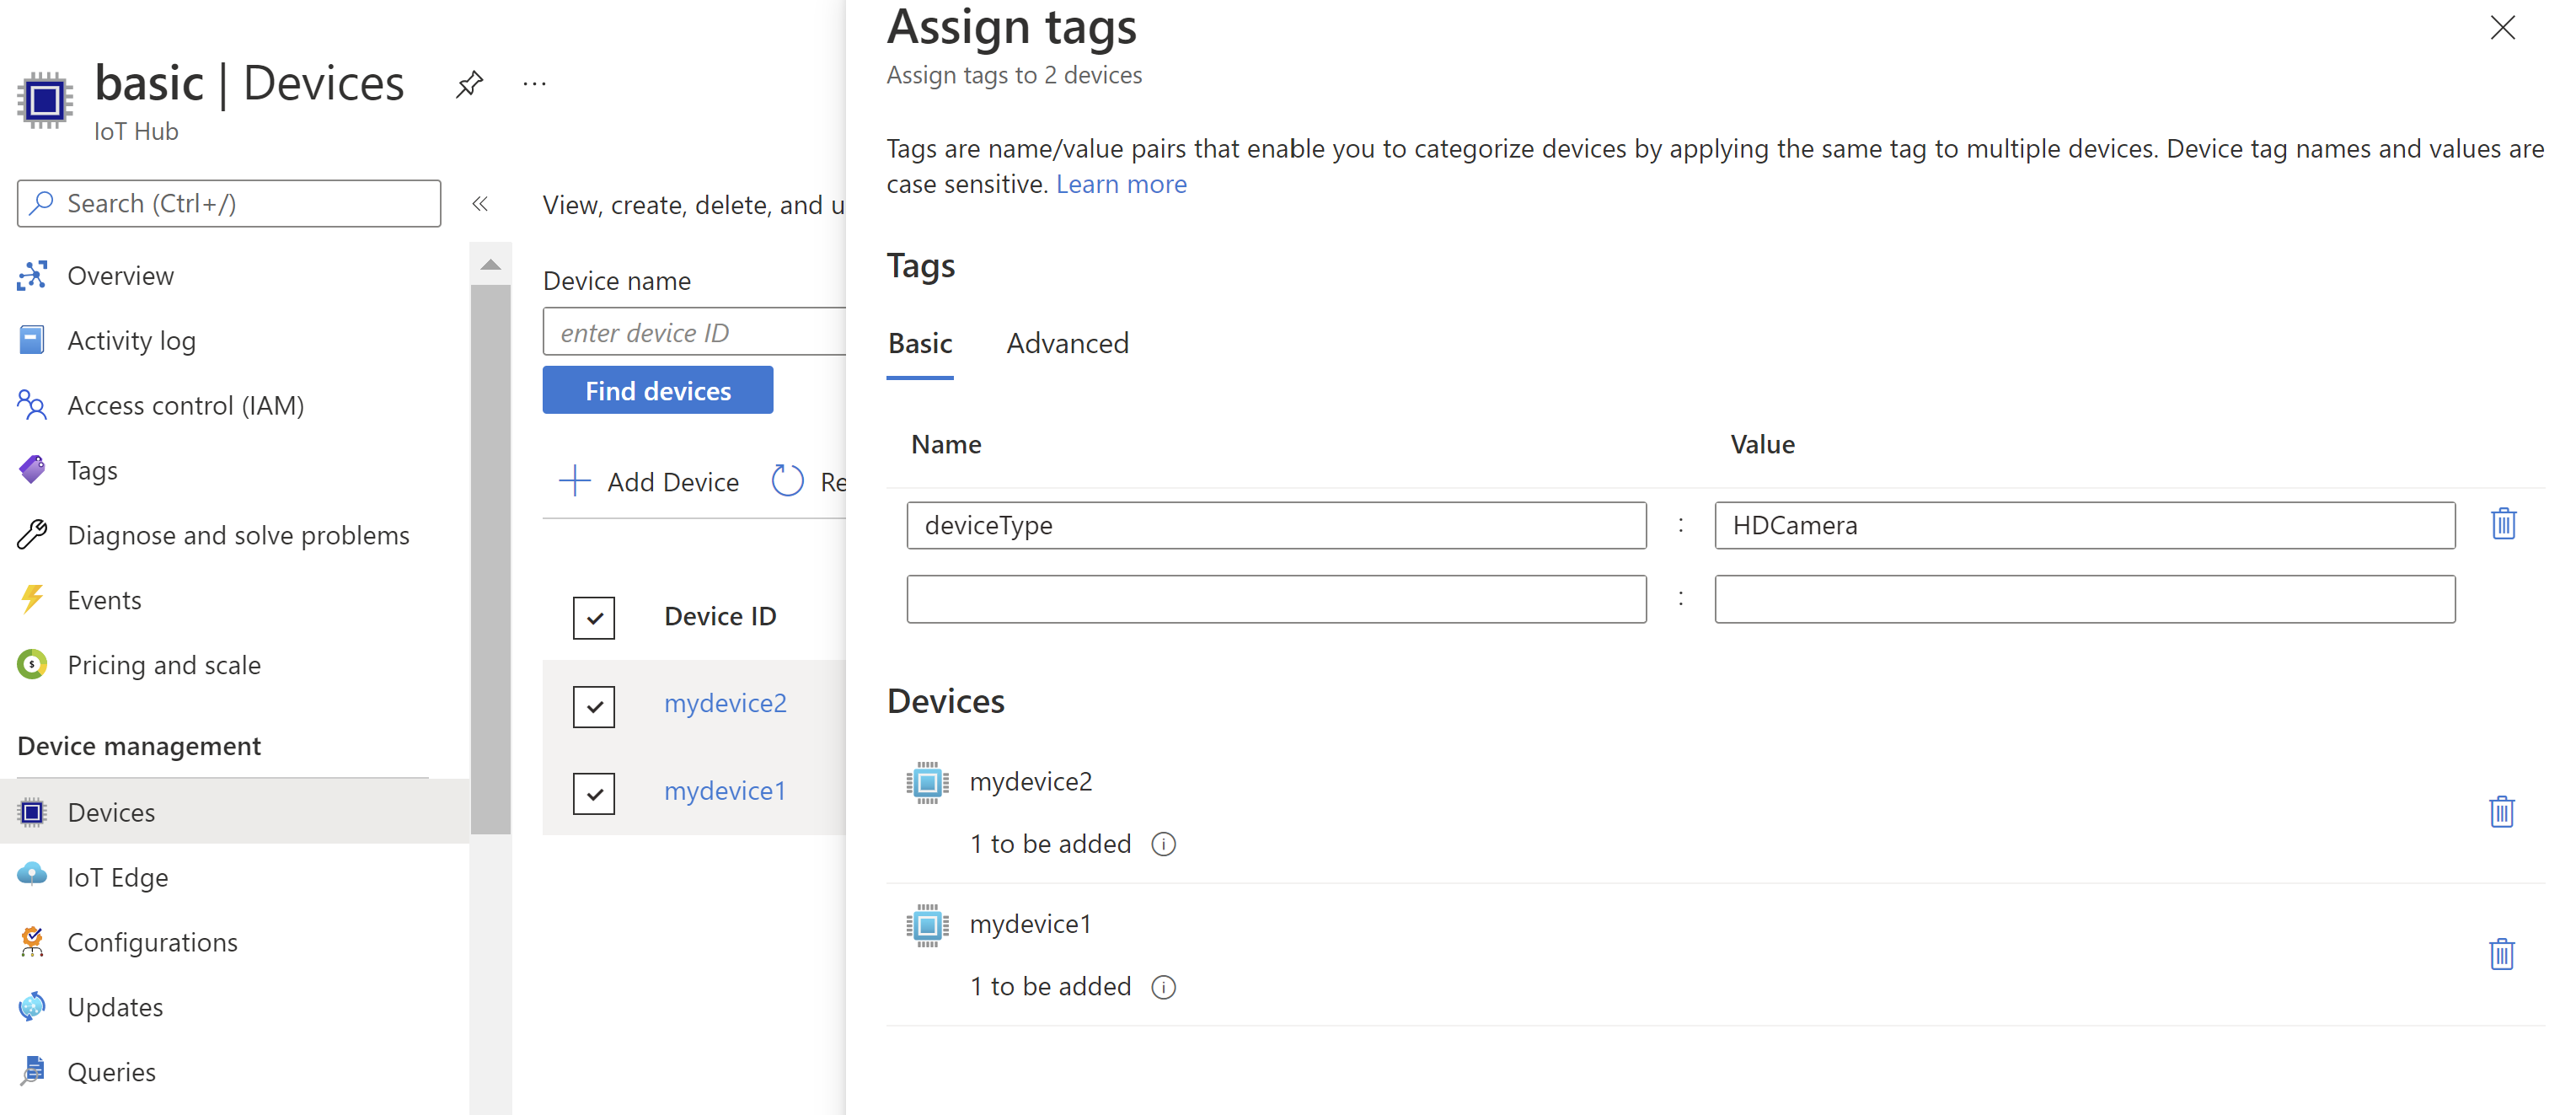 Screenshot of assigning tags to devices screen.